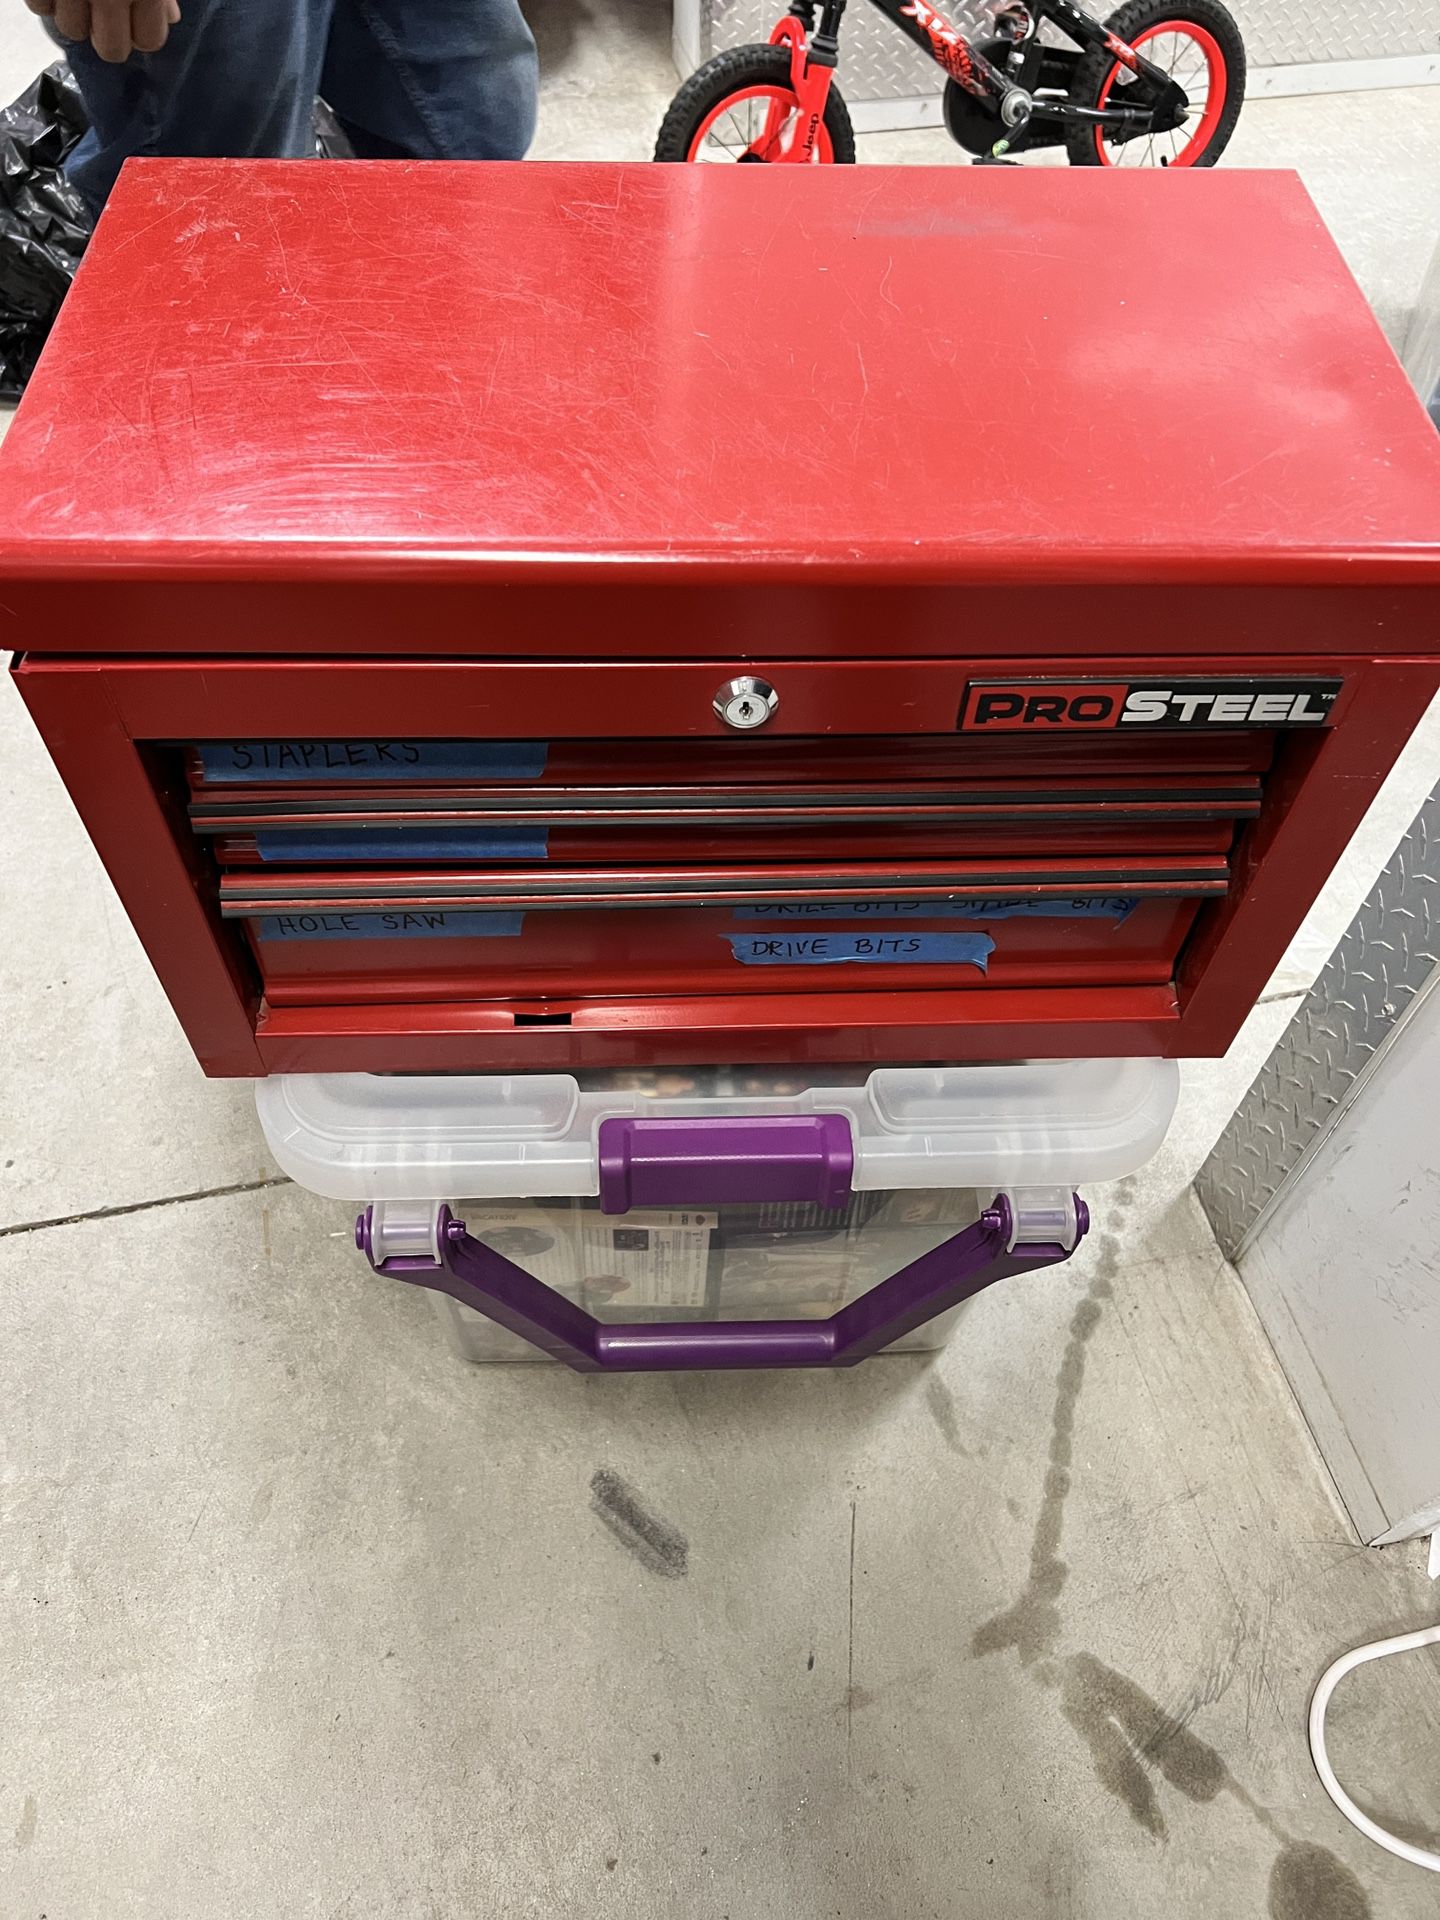 Pro Steel Box With Tools Included